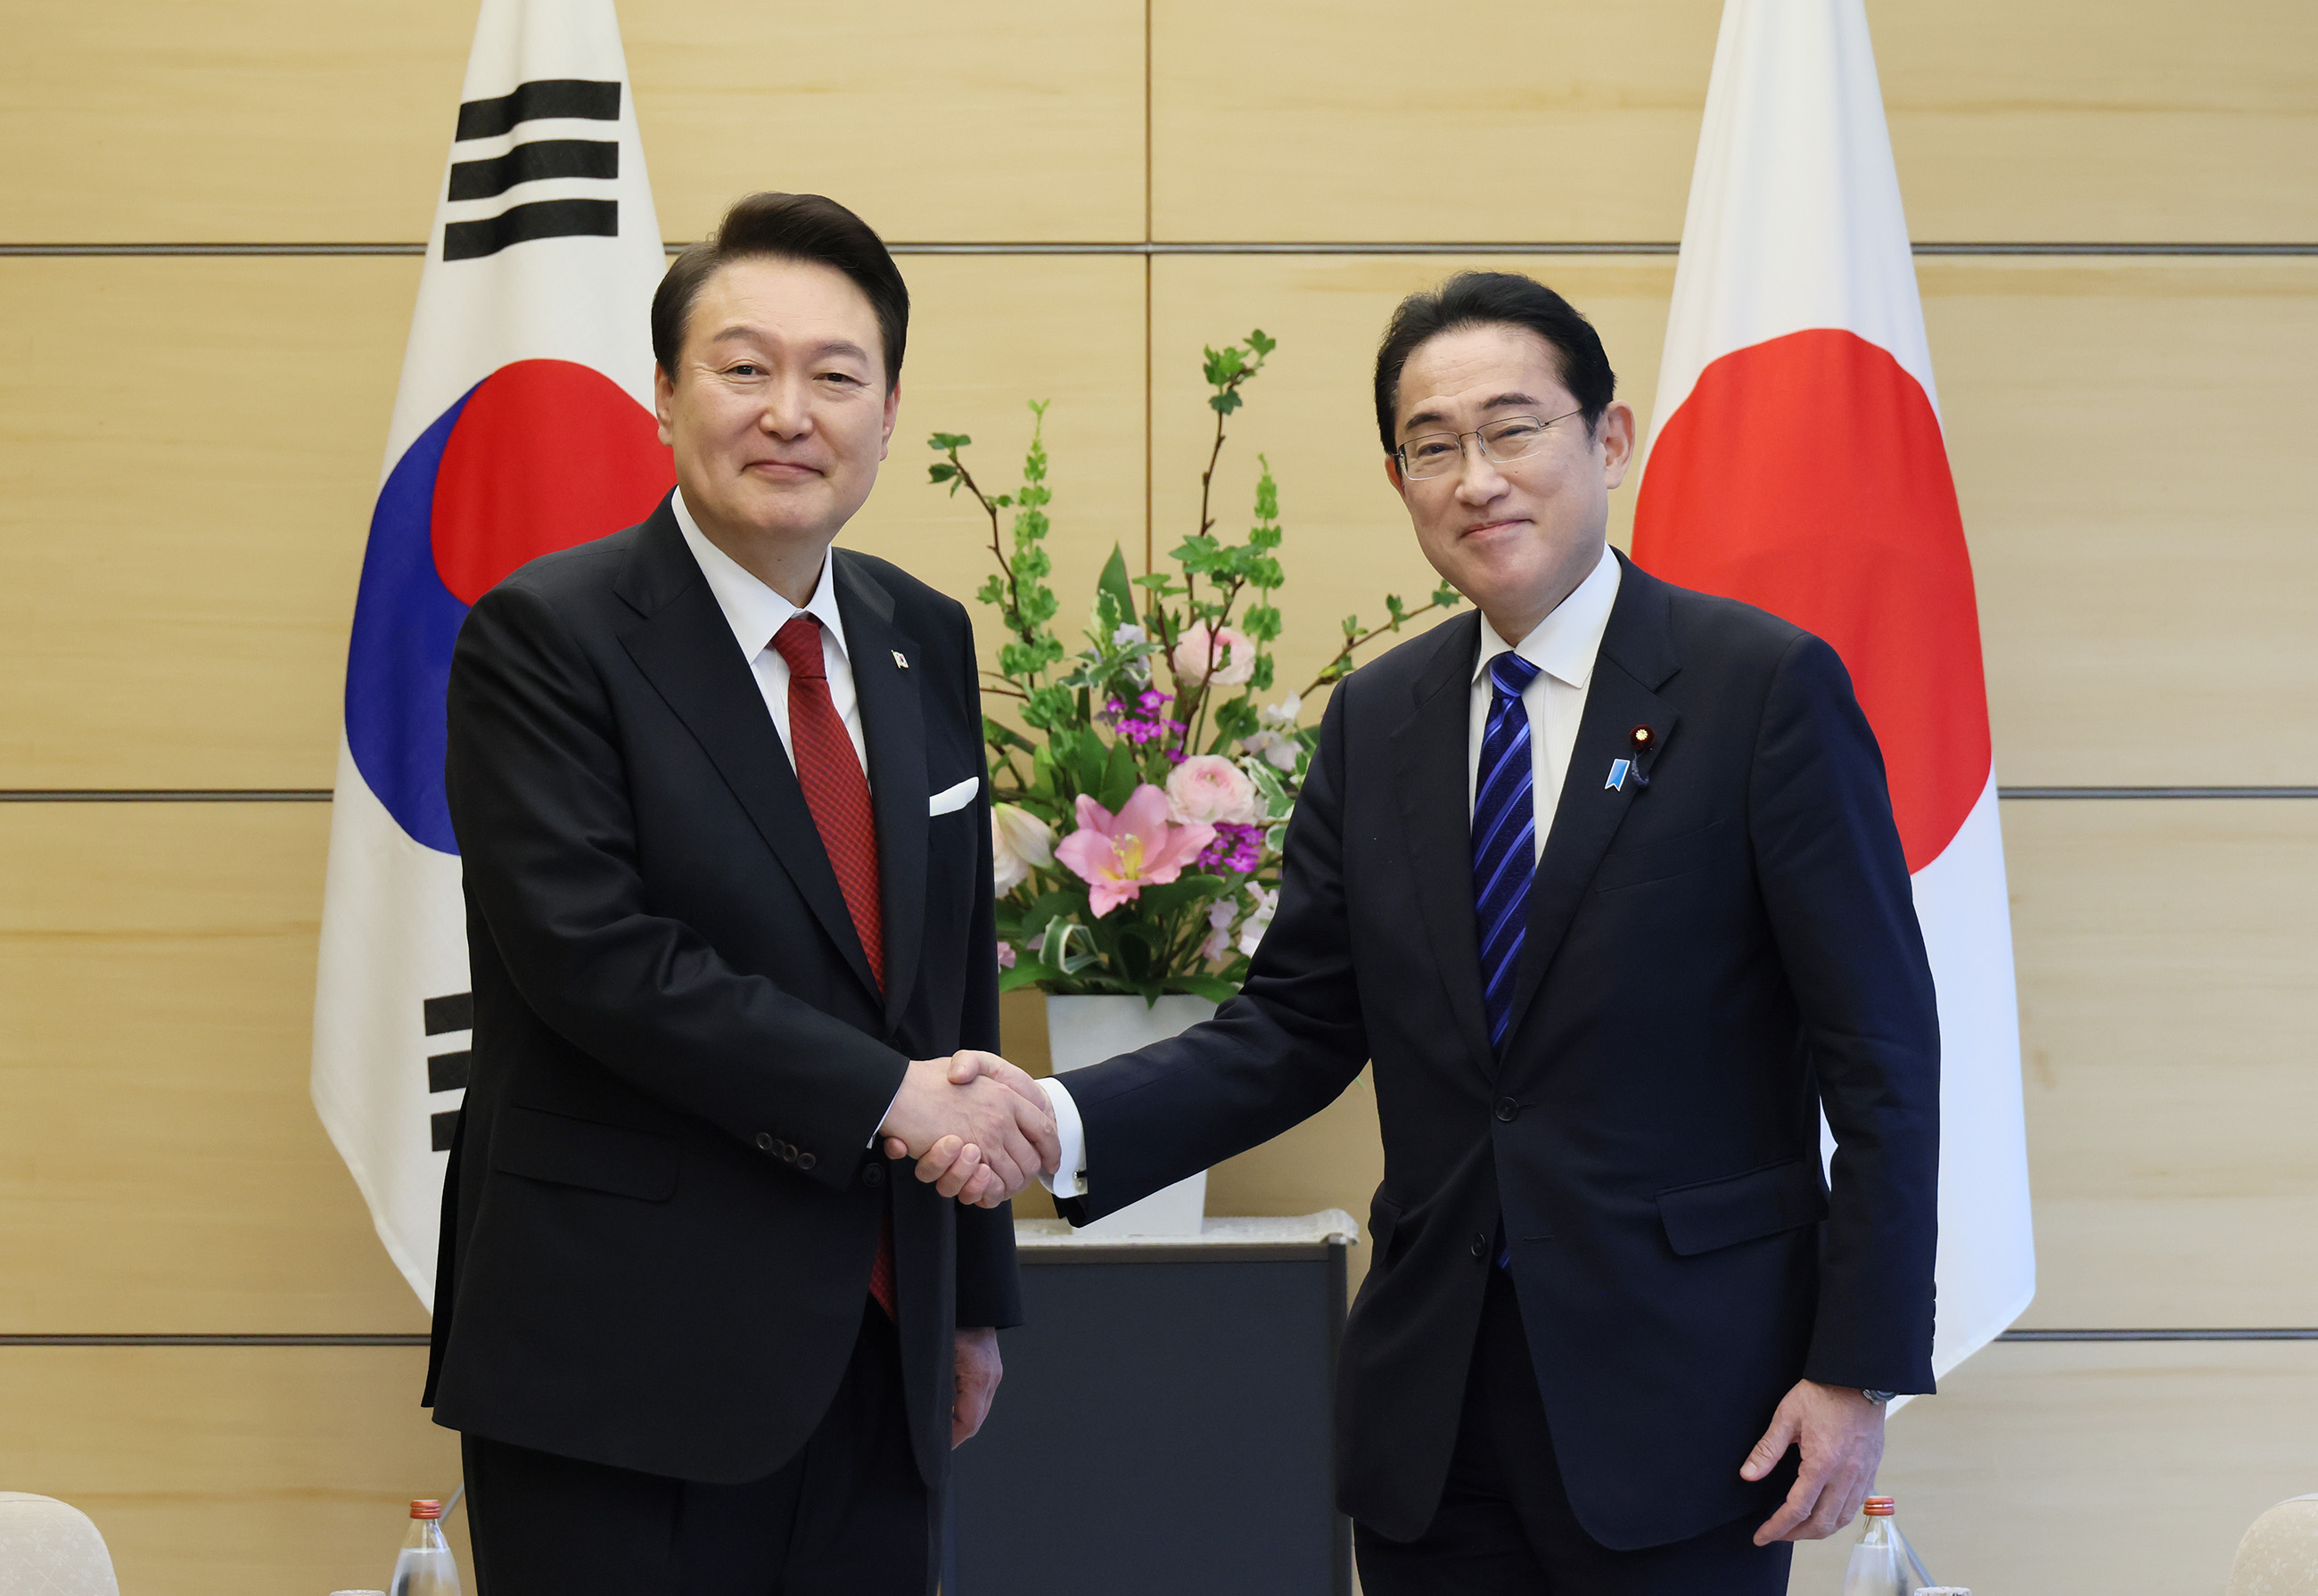 Japan-ROK Summit Meeting and Other Events